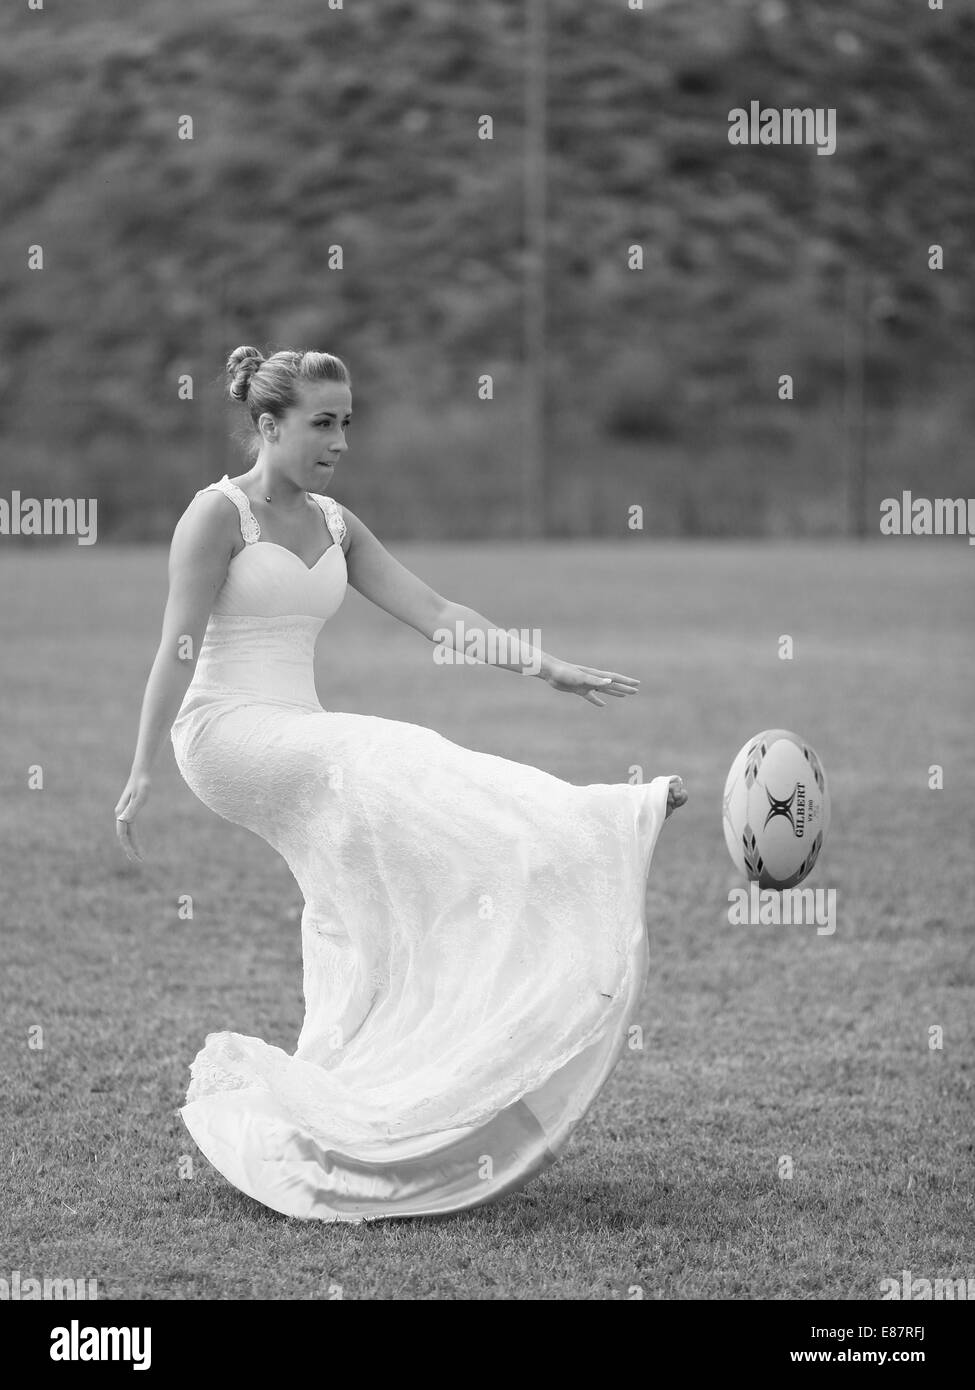 Trash the dress, Rugby, bride playing the ball Stock Photo